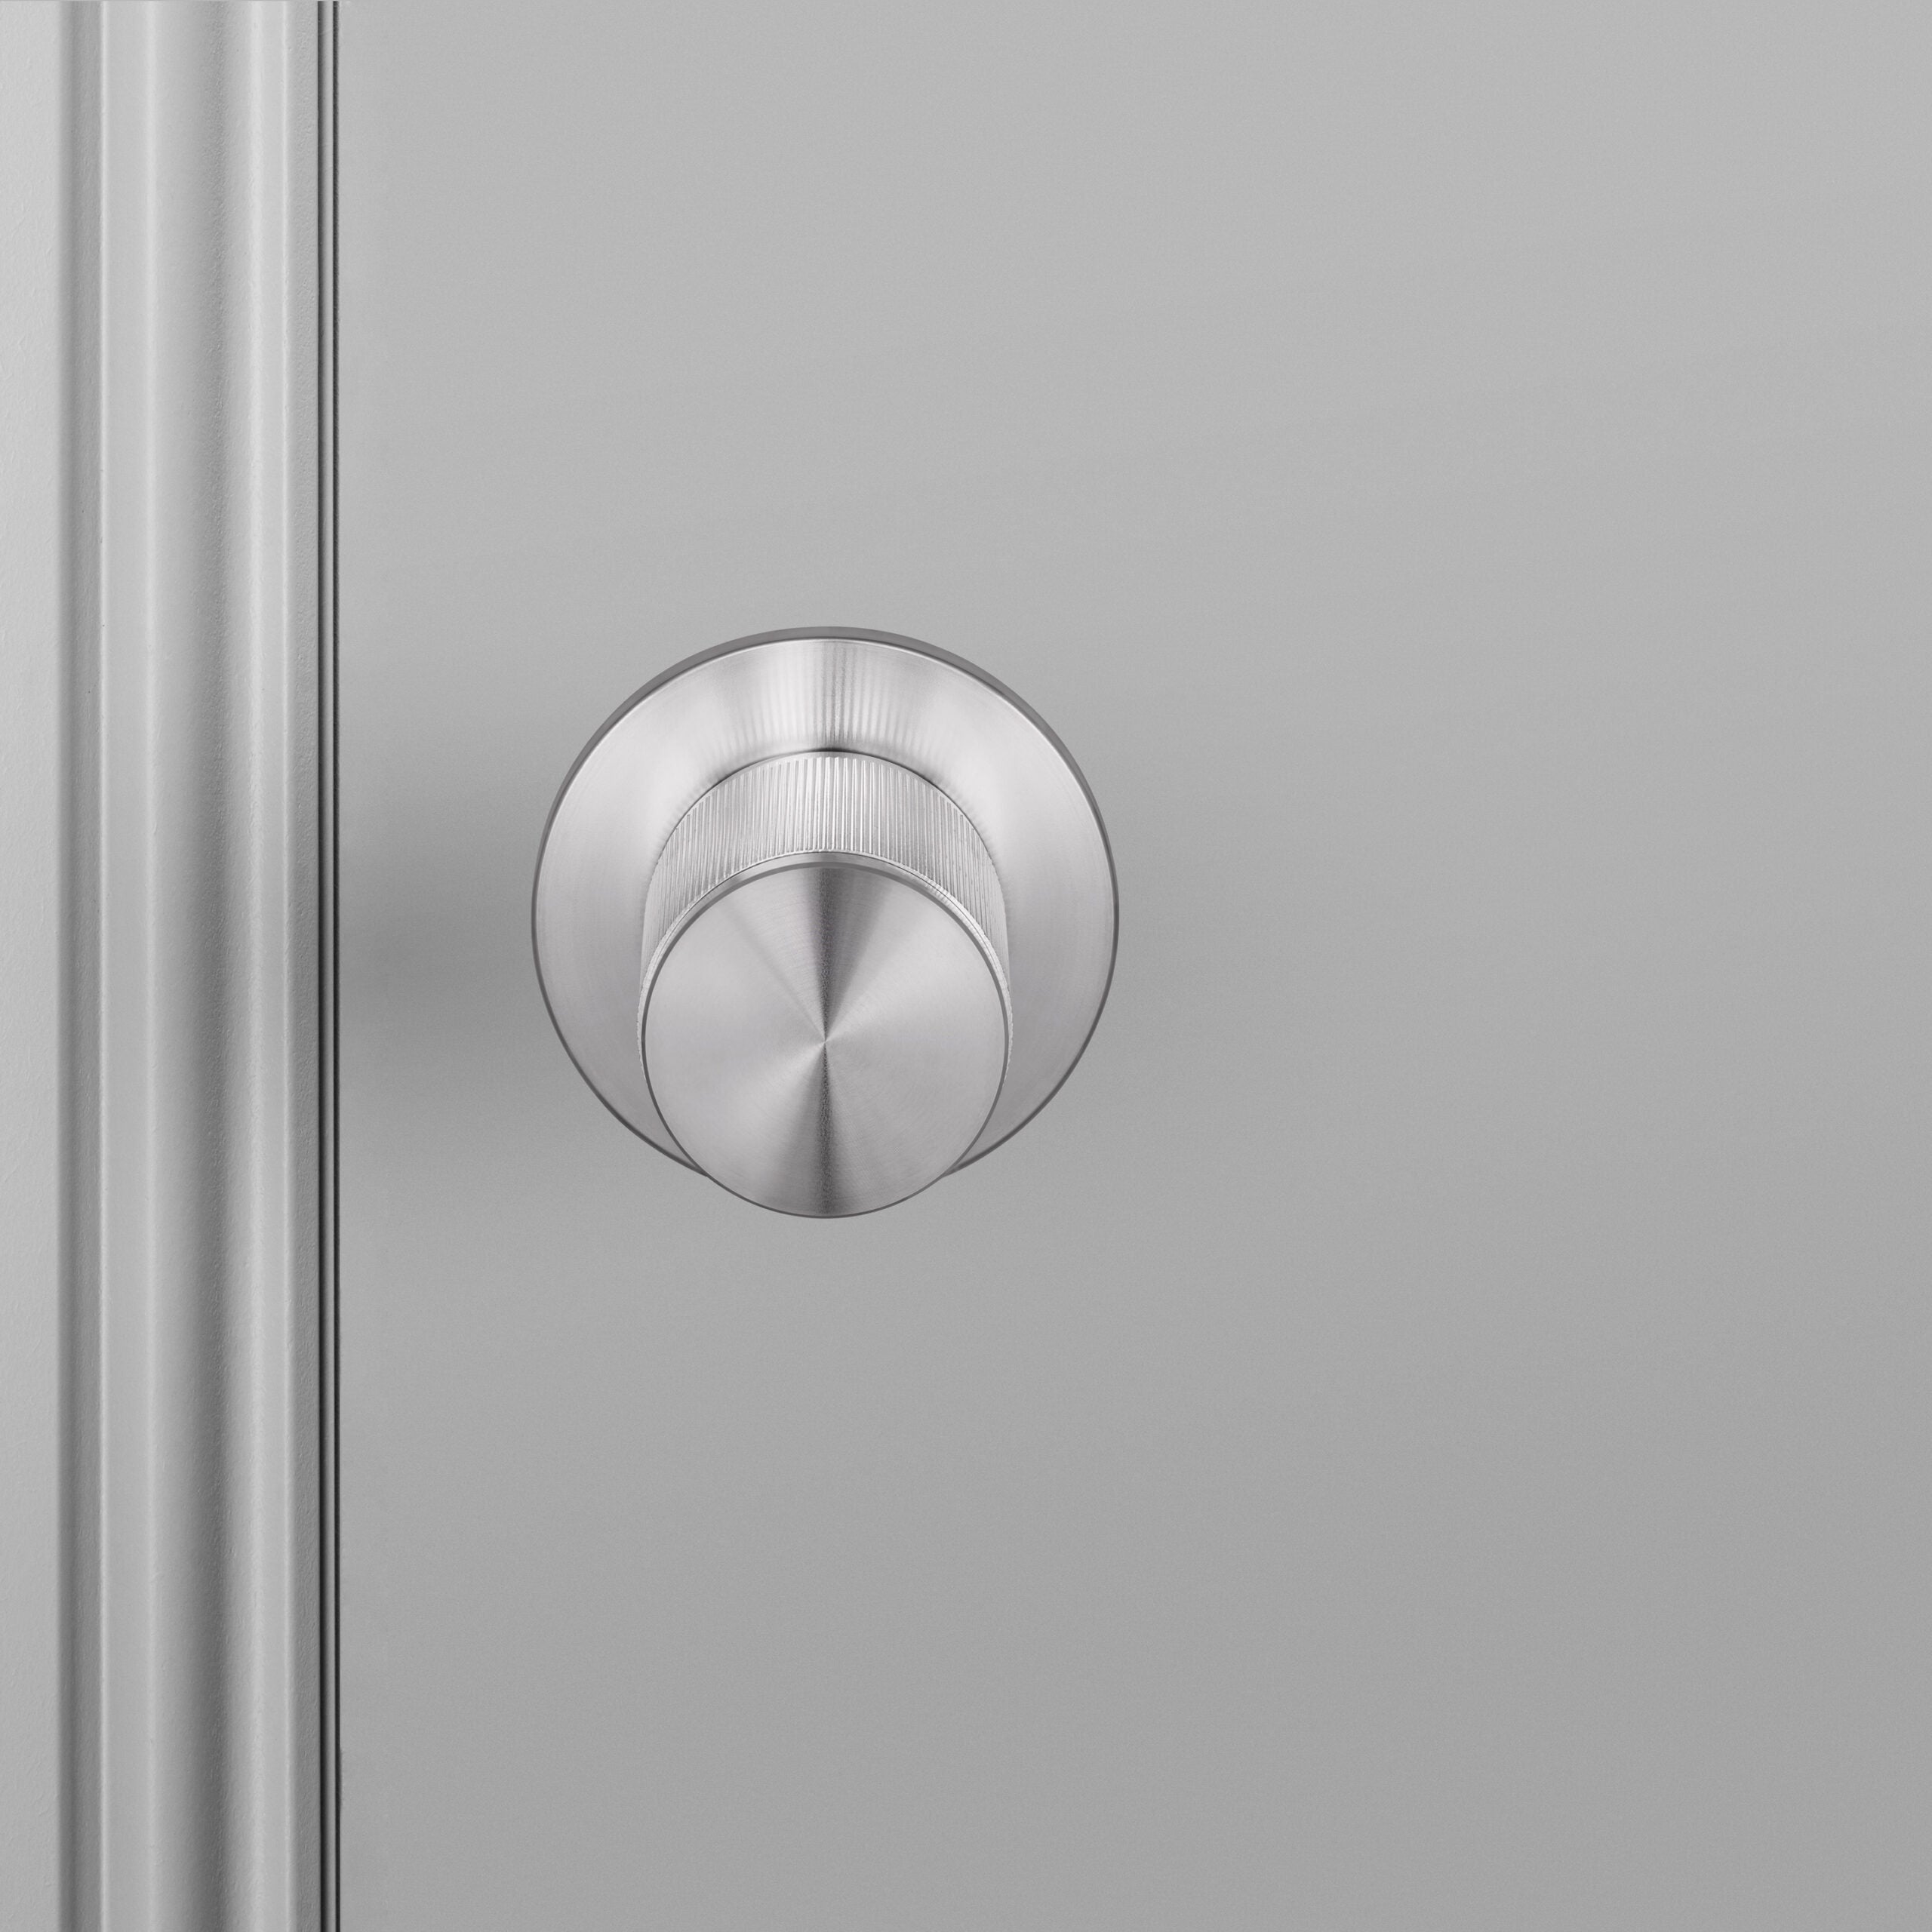 Buster + Punch Conventional Door Handle, Linear Design - PASSAGE TYPE Hardware Buster + Punch Steel  